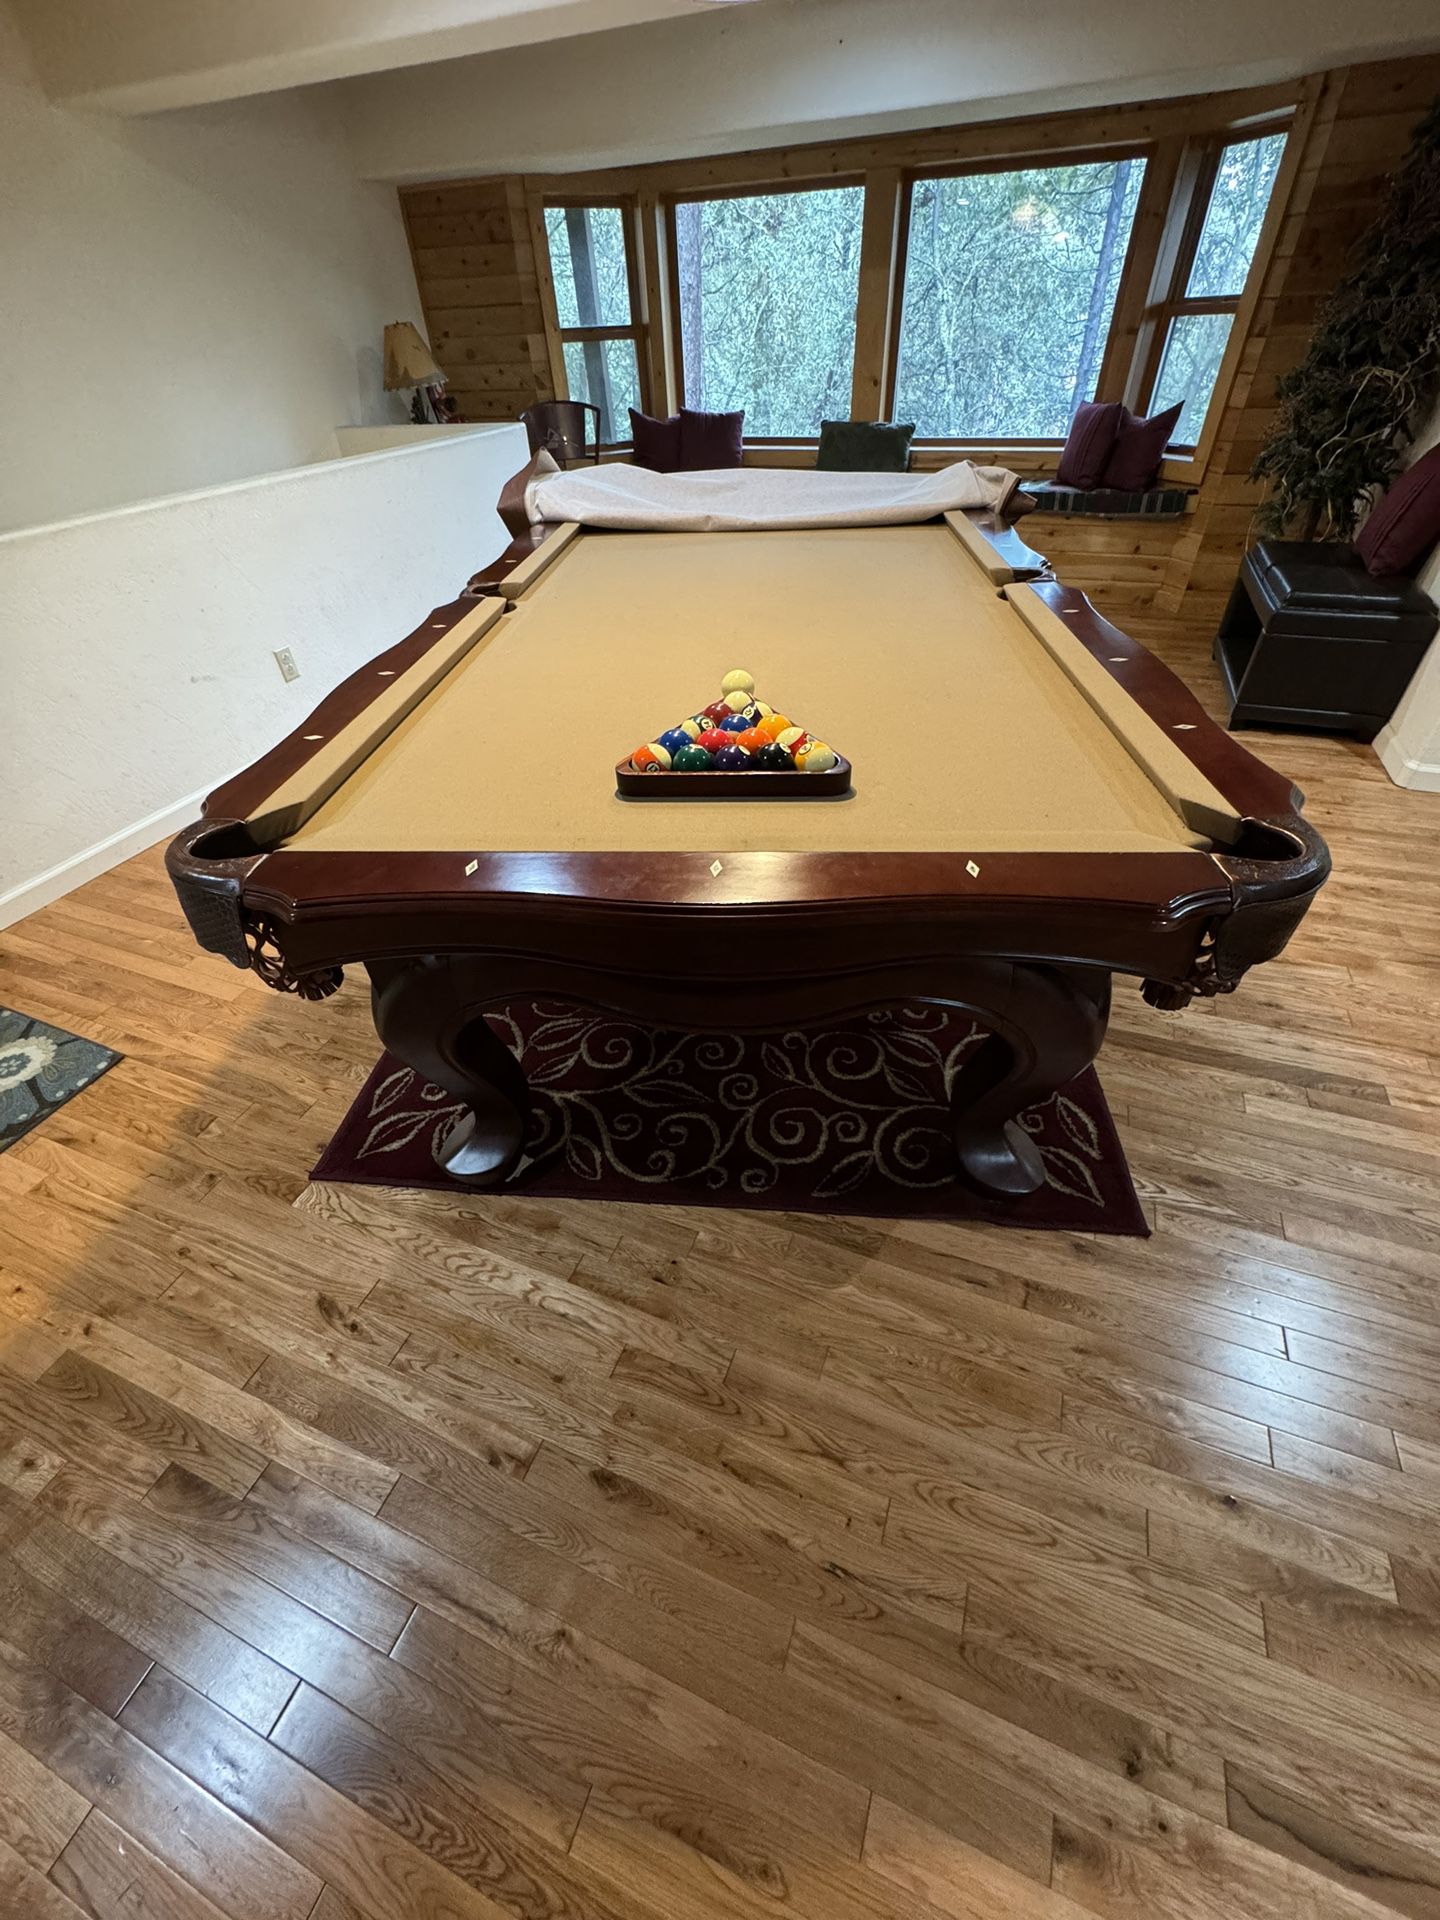 Pool Table, Slate With Cover, Ping Pong And Hockey Top Board and Bar